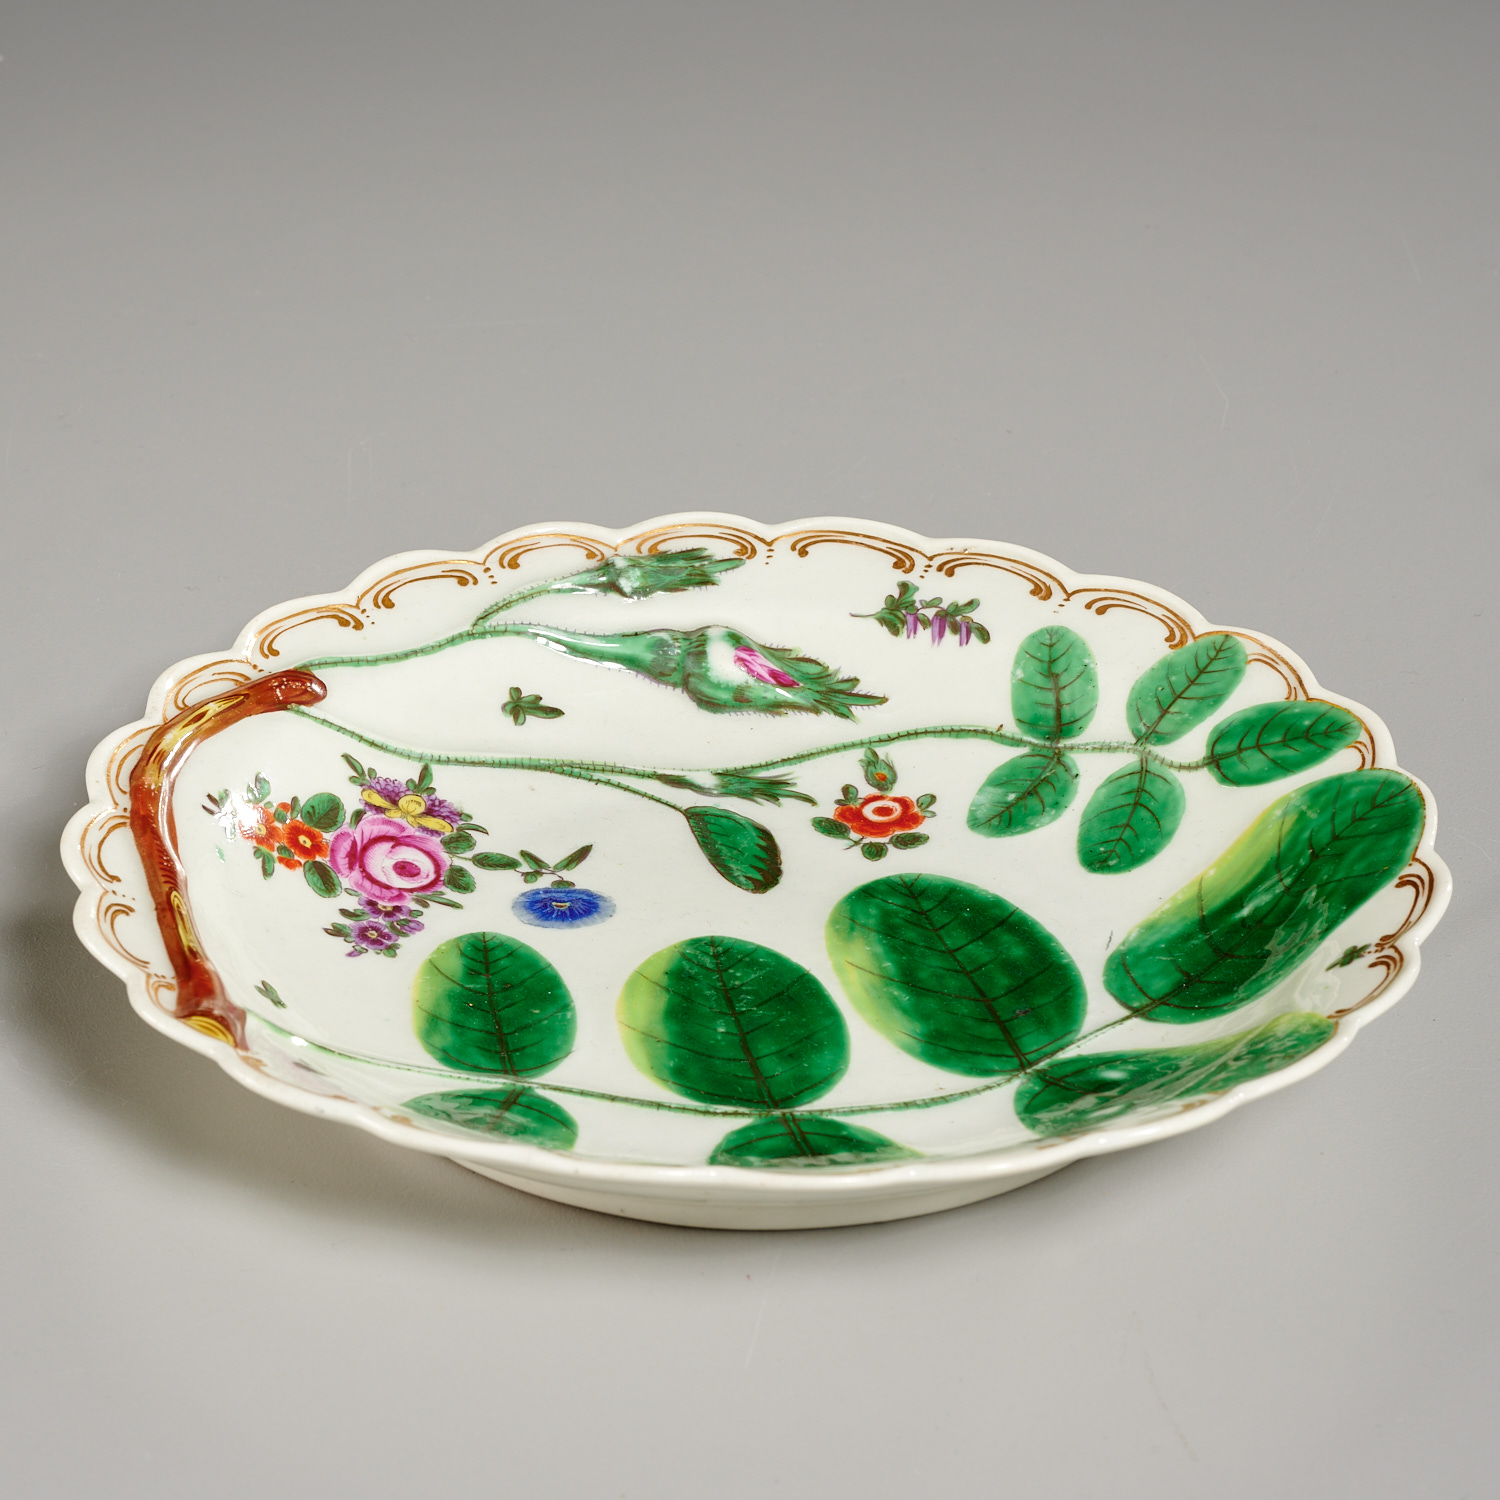 Early Worcester Porcelain Blind Earl Plate - Image 3 of 4